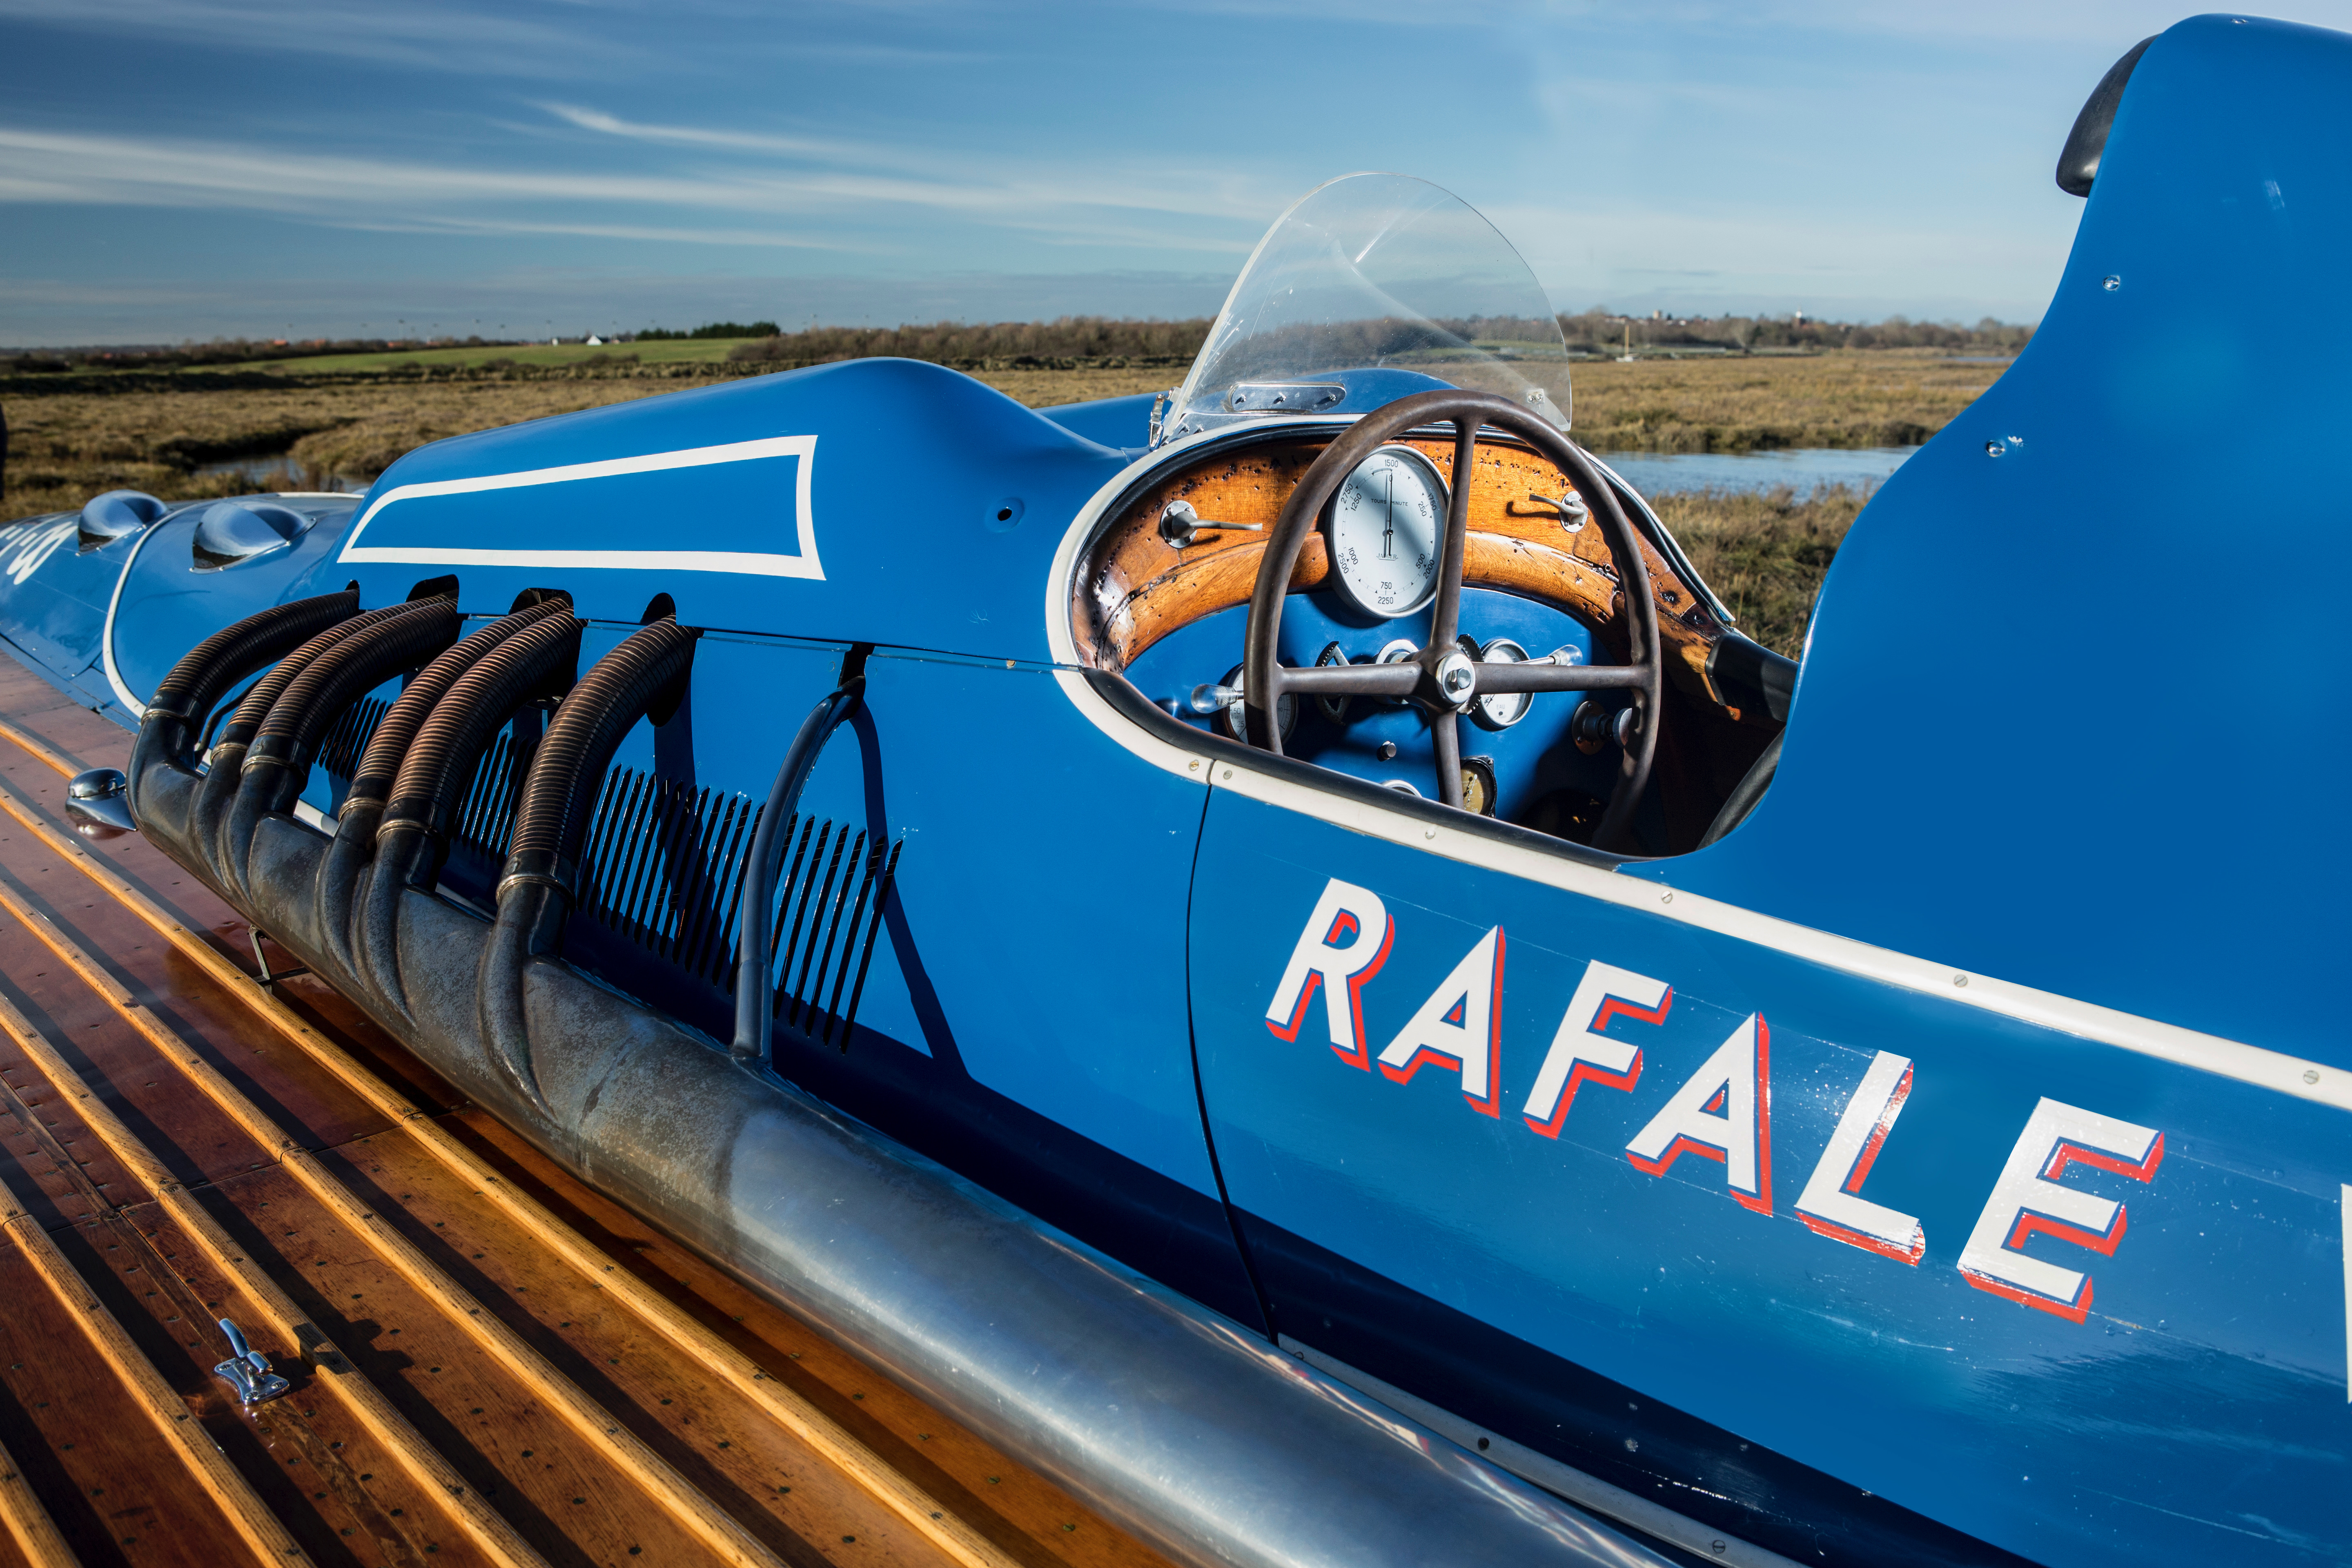 Like a Bugatti on the water: Rafale V racing boat on Paris auction docket